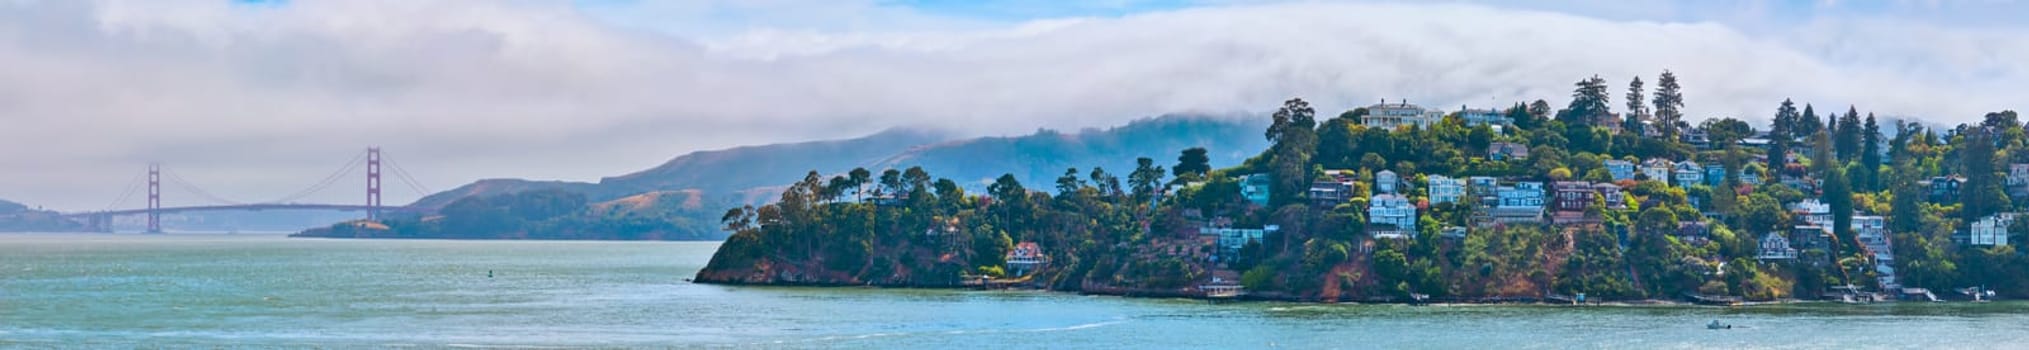 Image of Panorama California Tiburon coastline with Golden Gate Bridge and clouds rolling over mountains